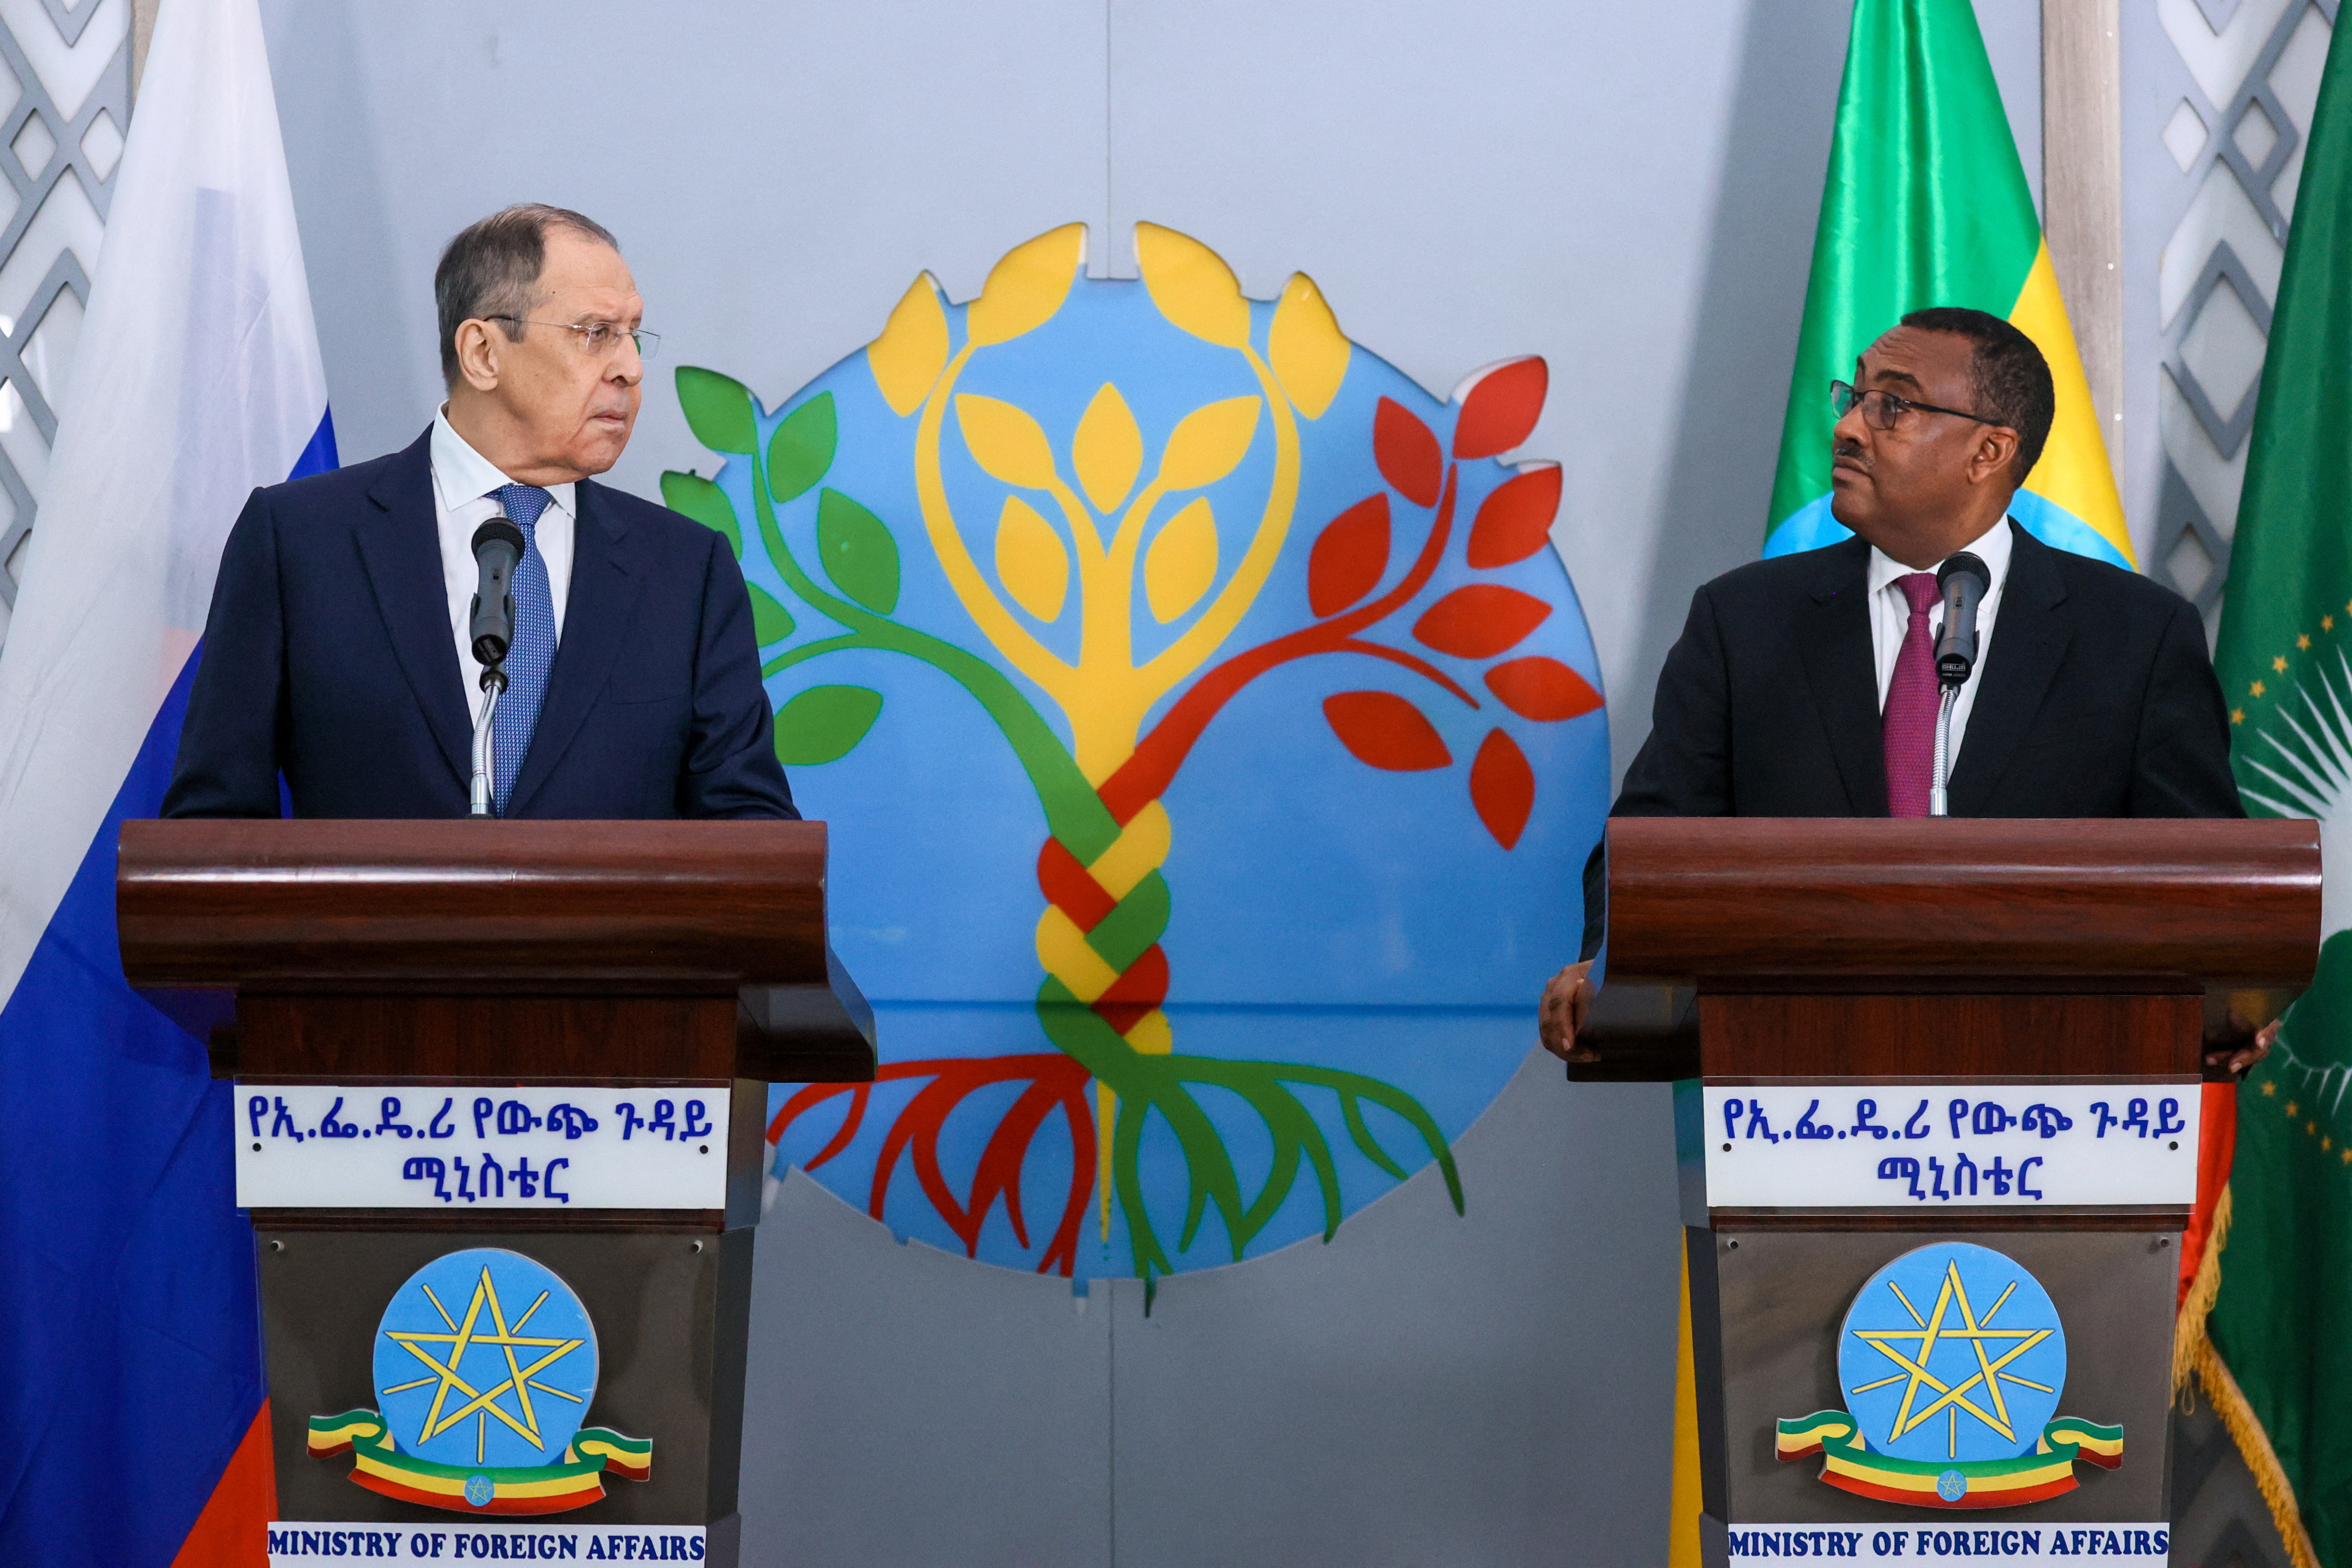 Russian Foreign Minister Lavrov and Ethiopian Foreign Minister Mekonnen attend a news conference in Addis Ababa